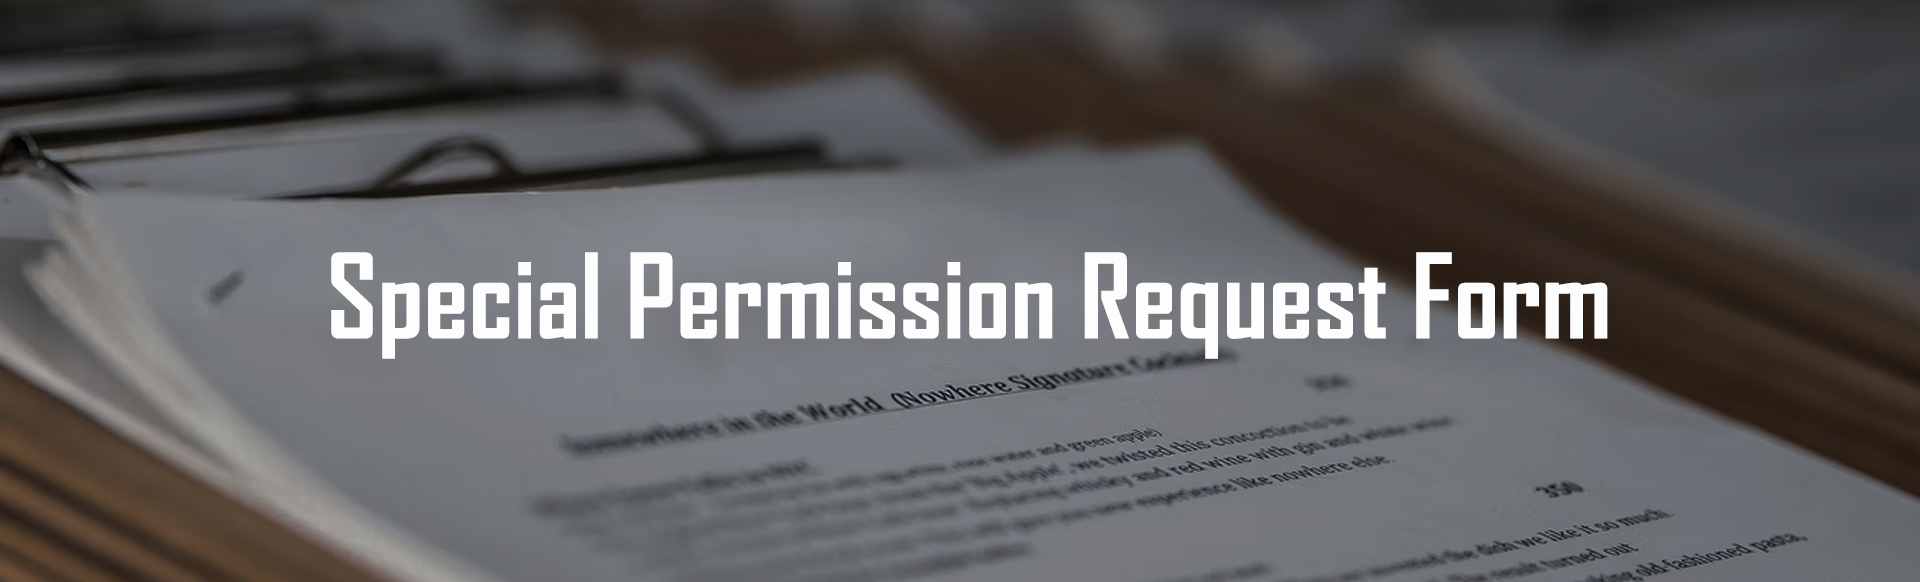 Special Permission Request Form